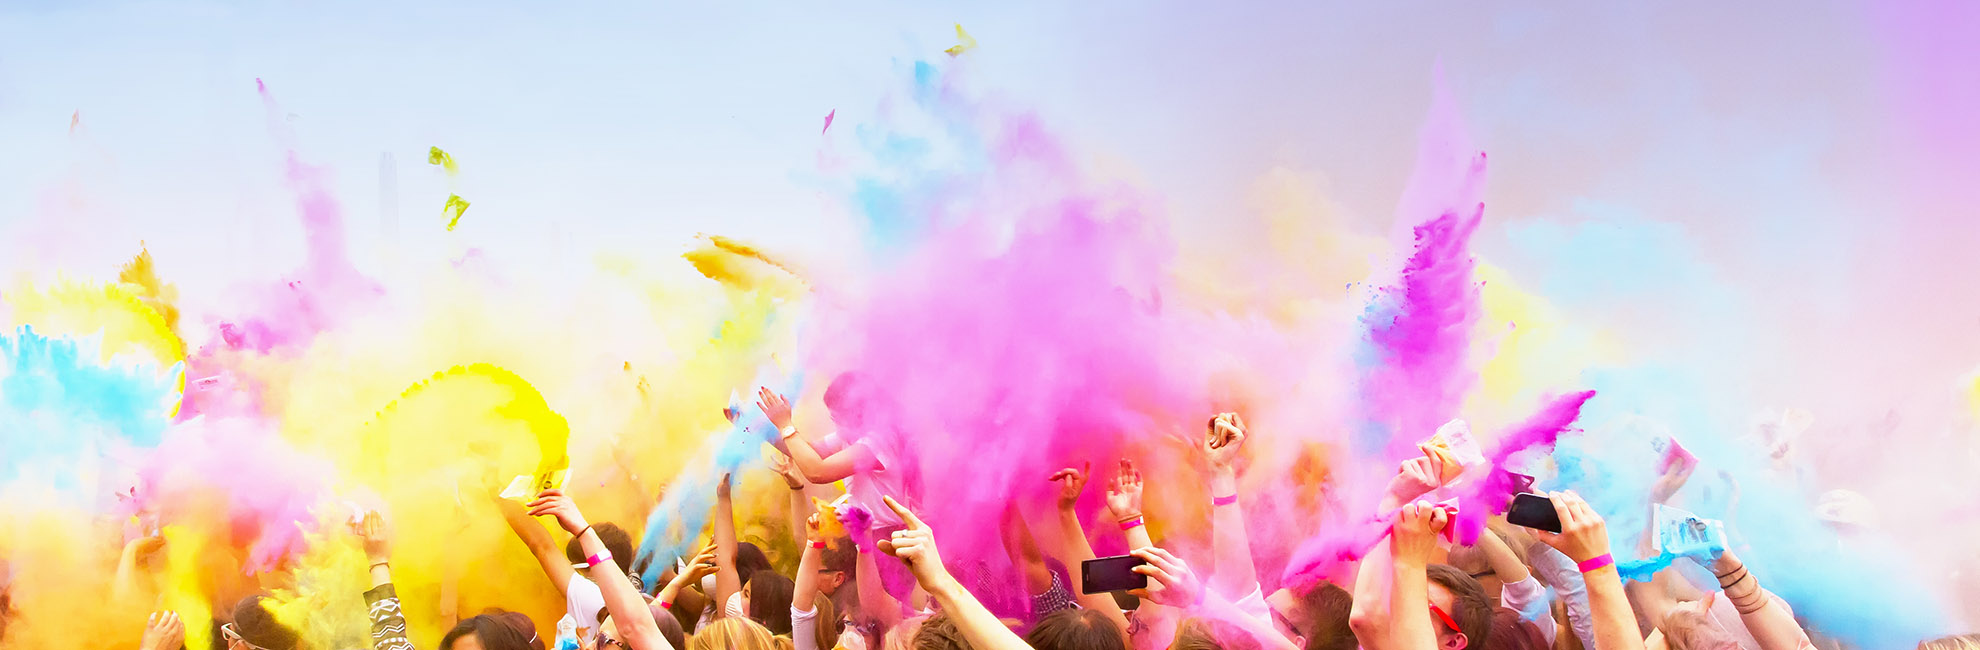 A crowd throwing paint in the air at a festival